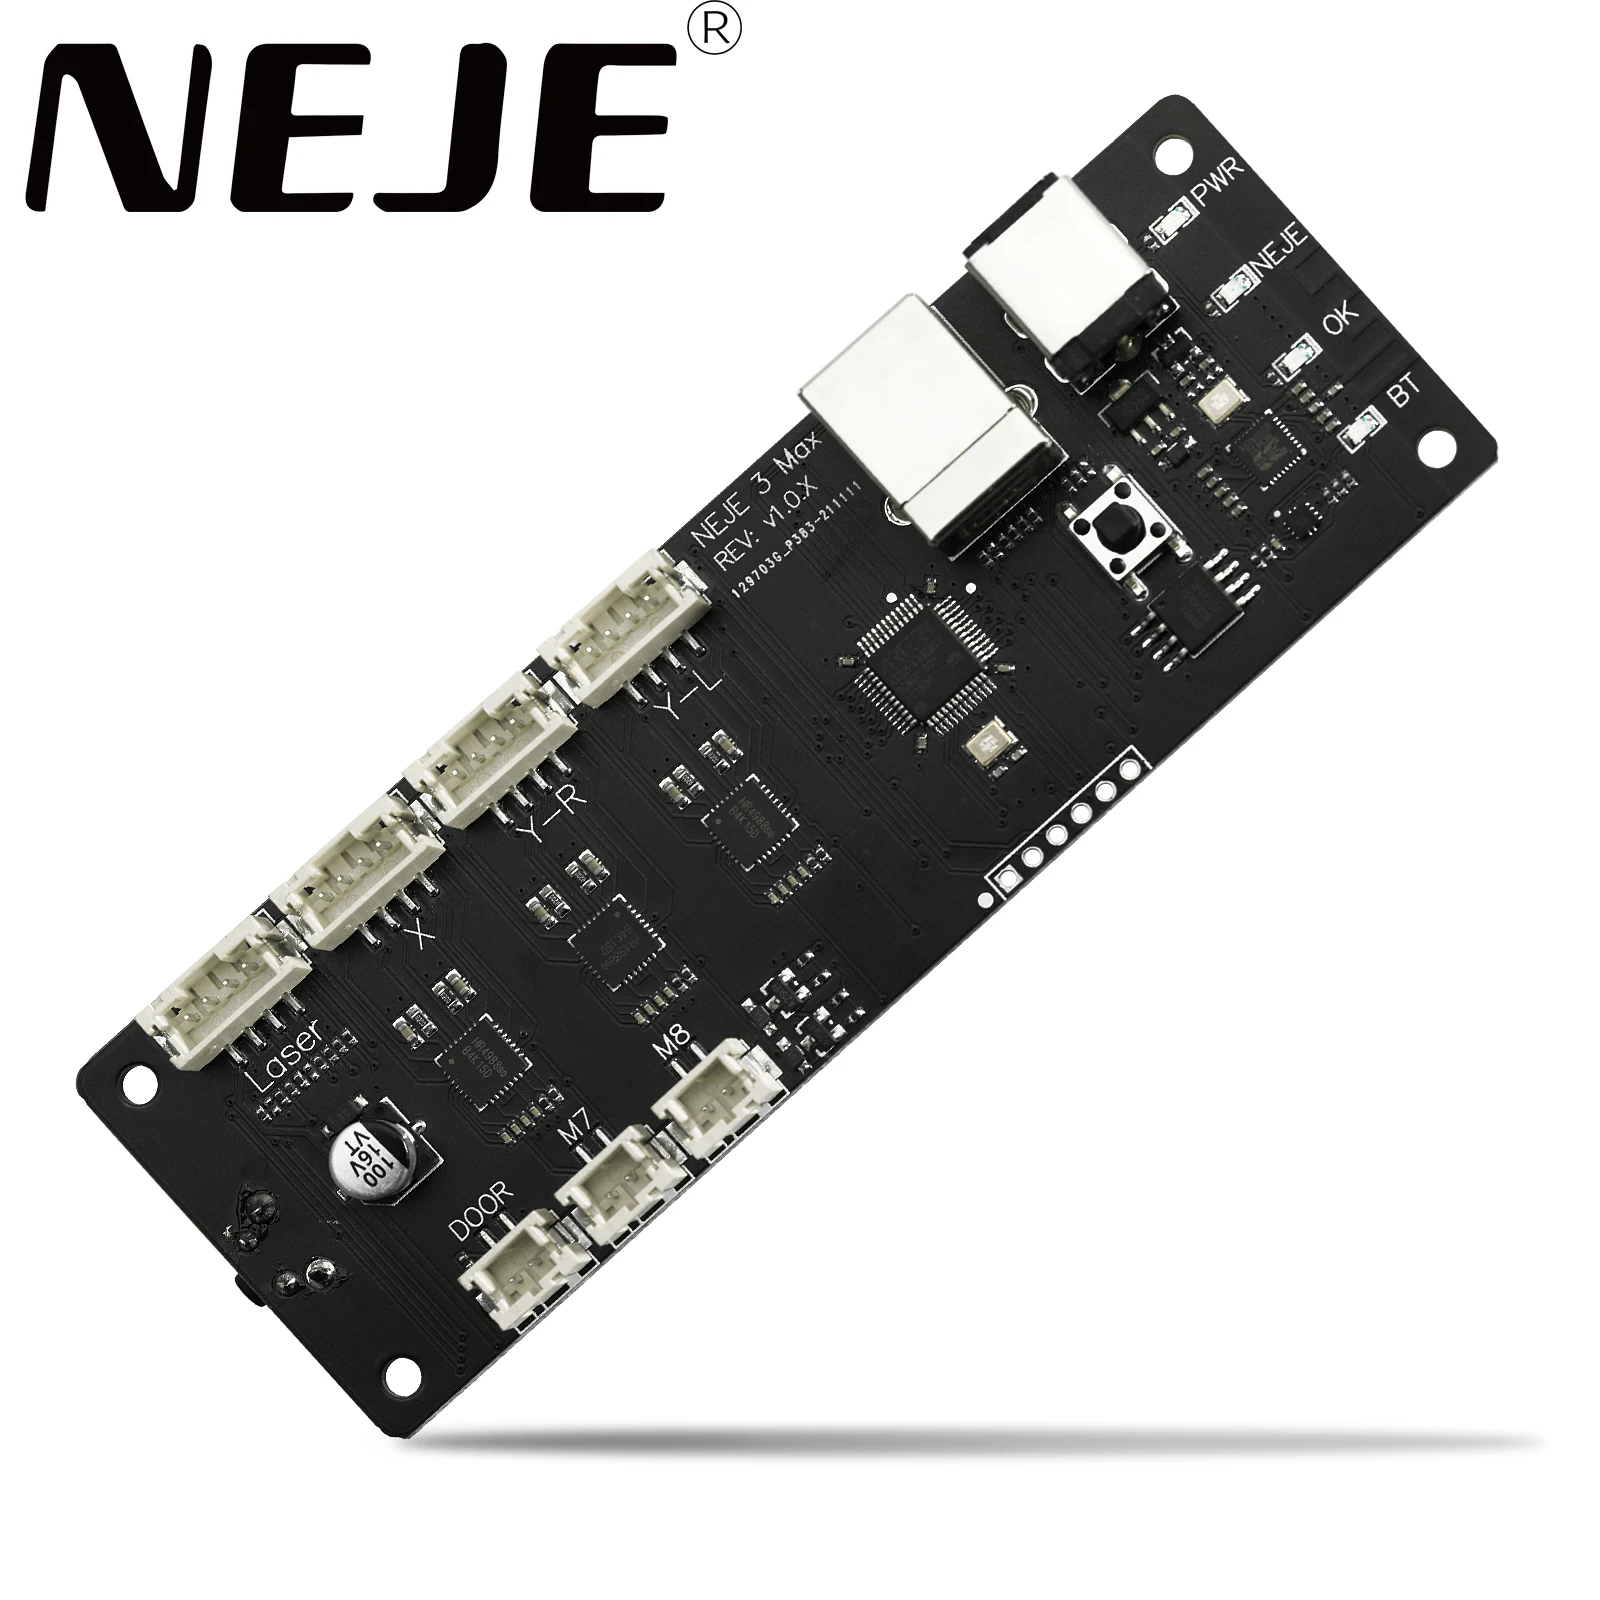 NEJE 3 Max Mainboard Replacement 2S Max N40630 A40640 Laser Cutting Laser Engraving Machine NEJE SOFTWARE LASERGRBL LIGHTBURN